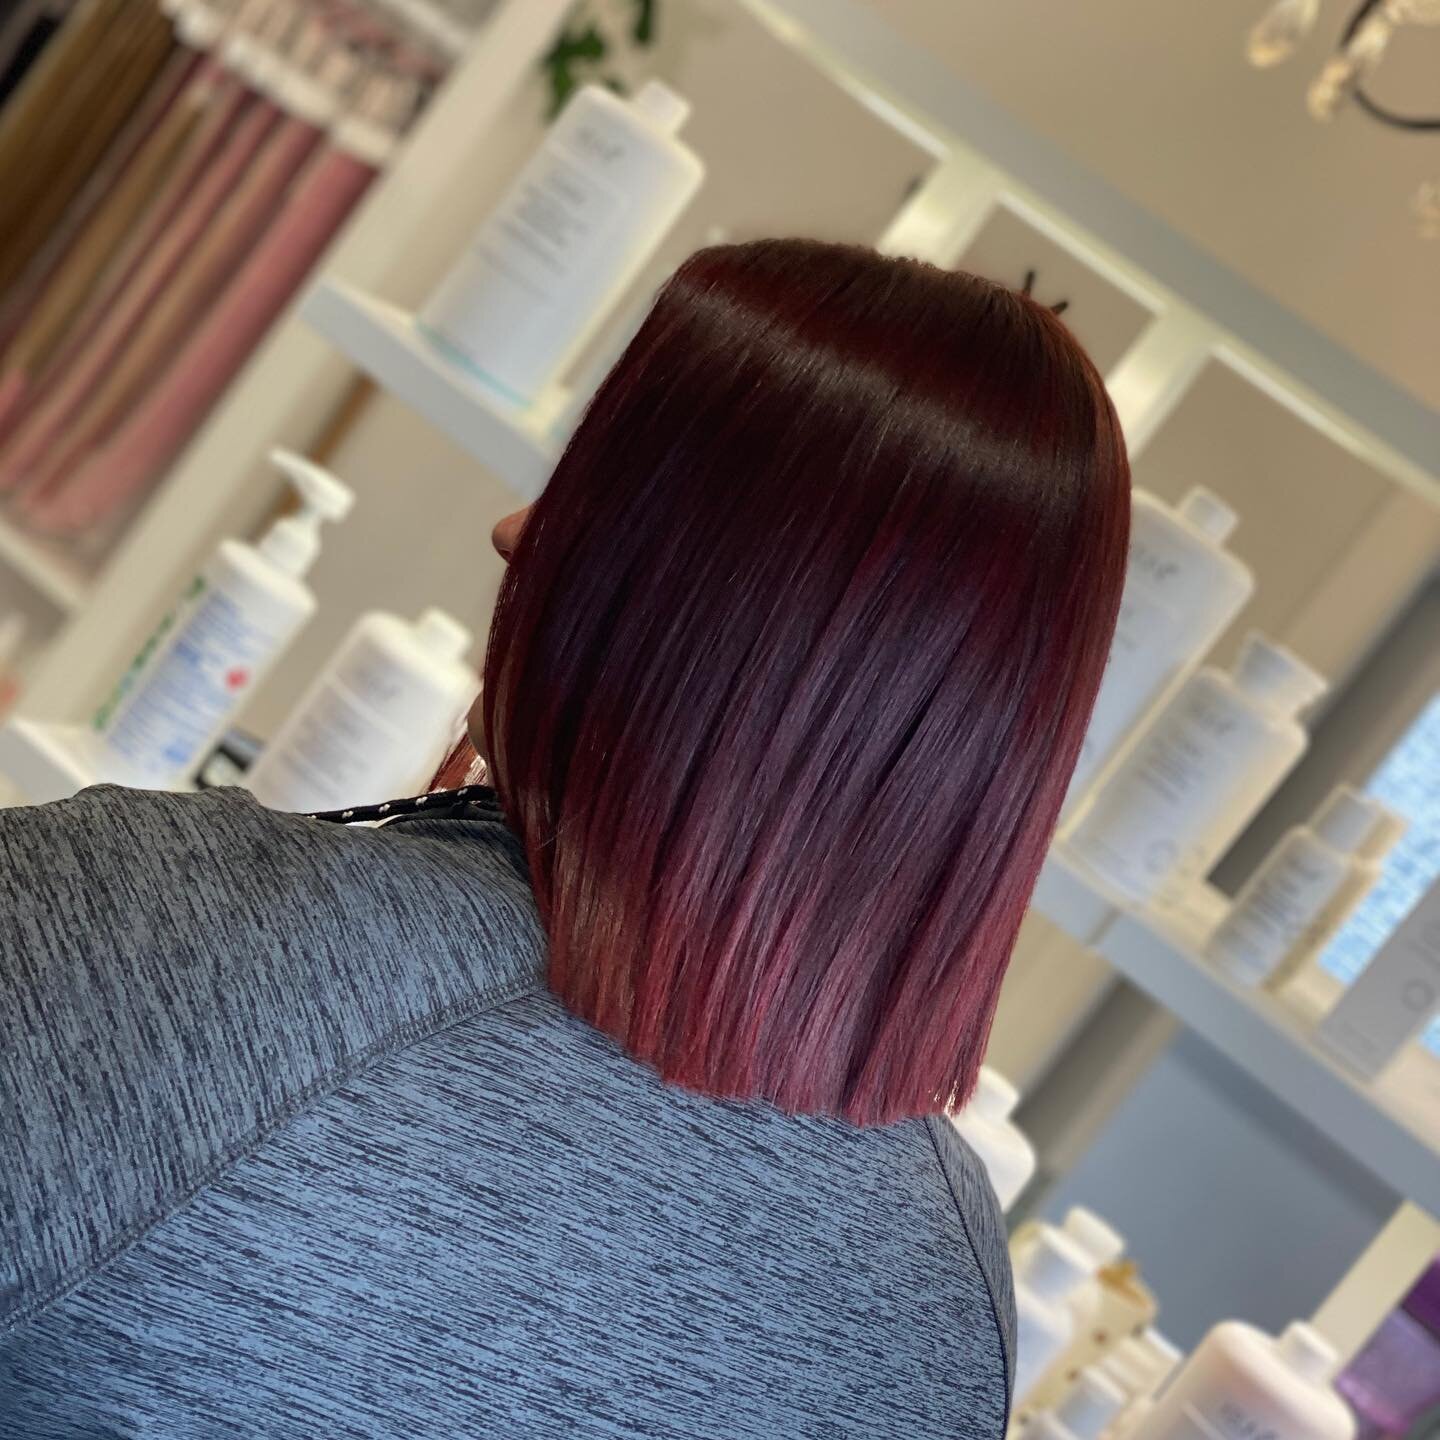 Radiant Red 😍🥰
.
Boring blonde be gone!